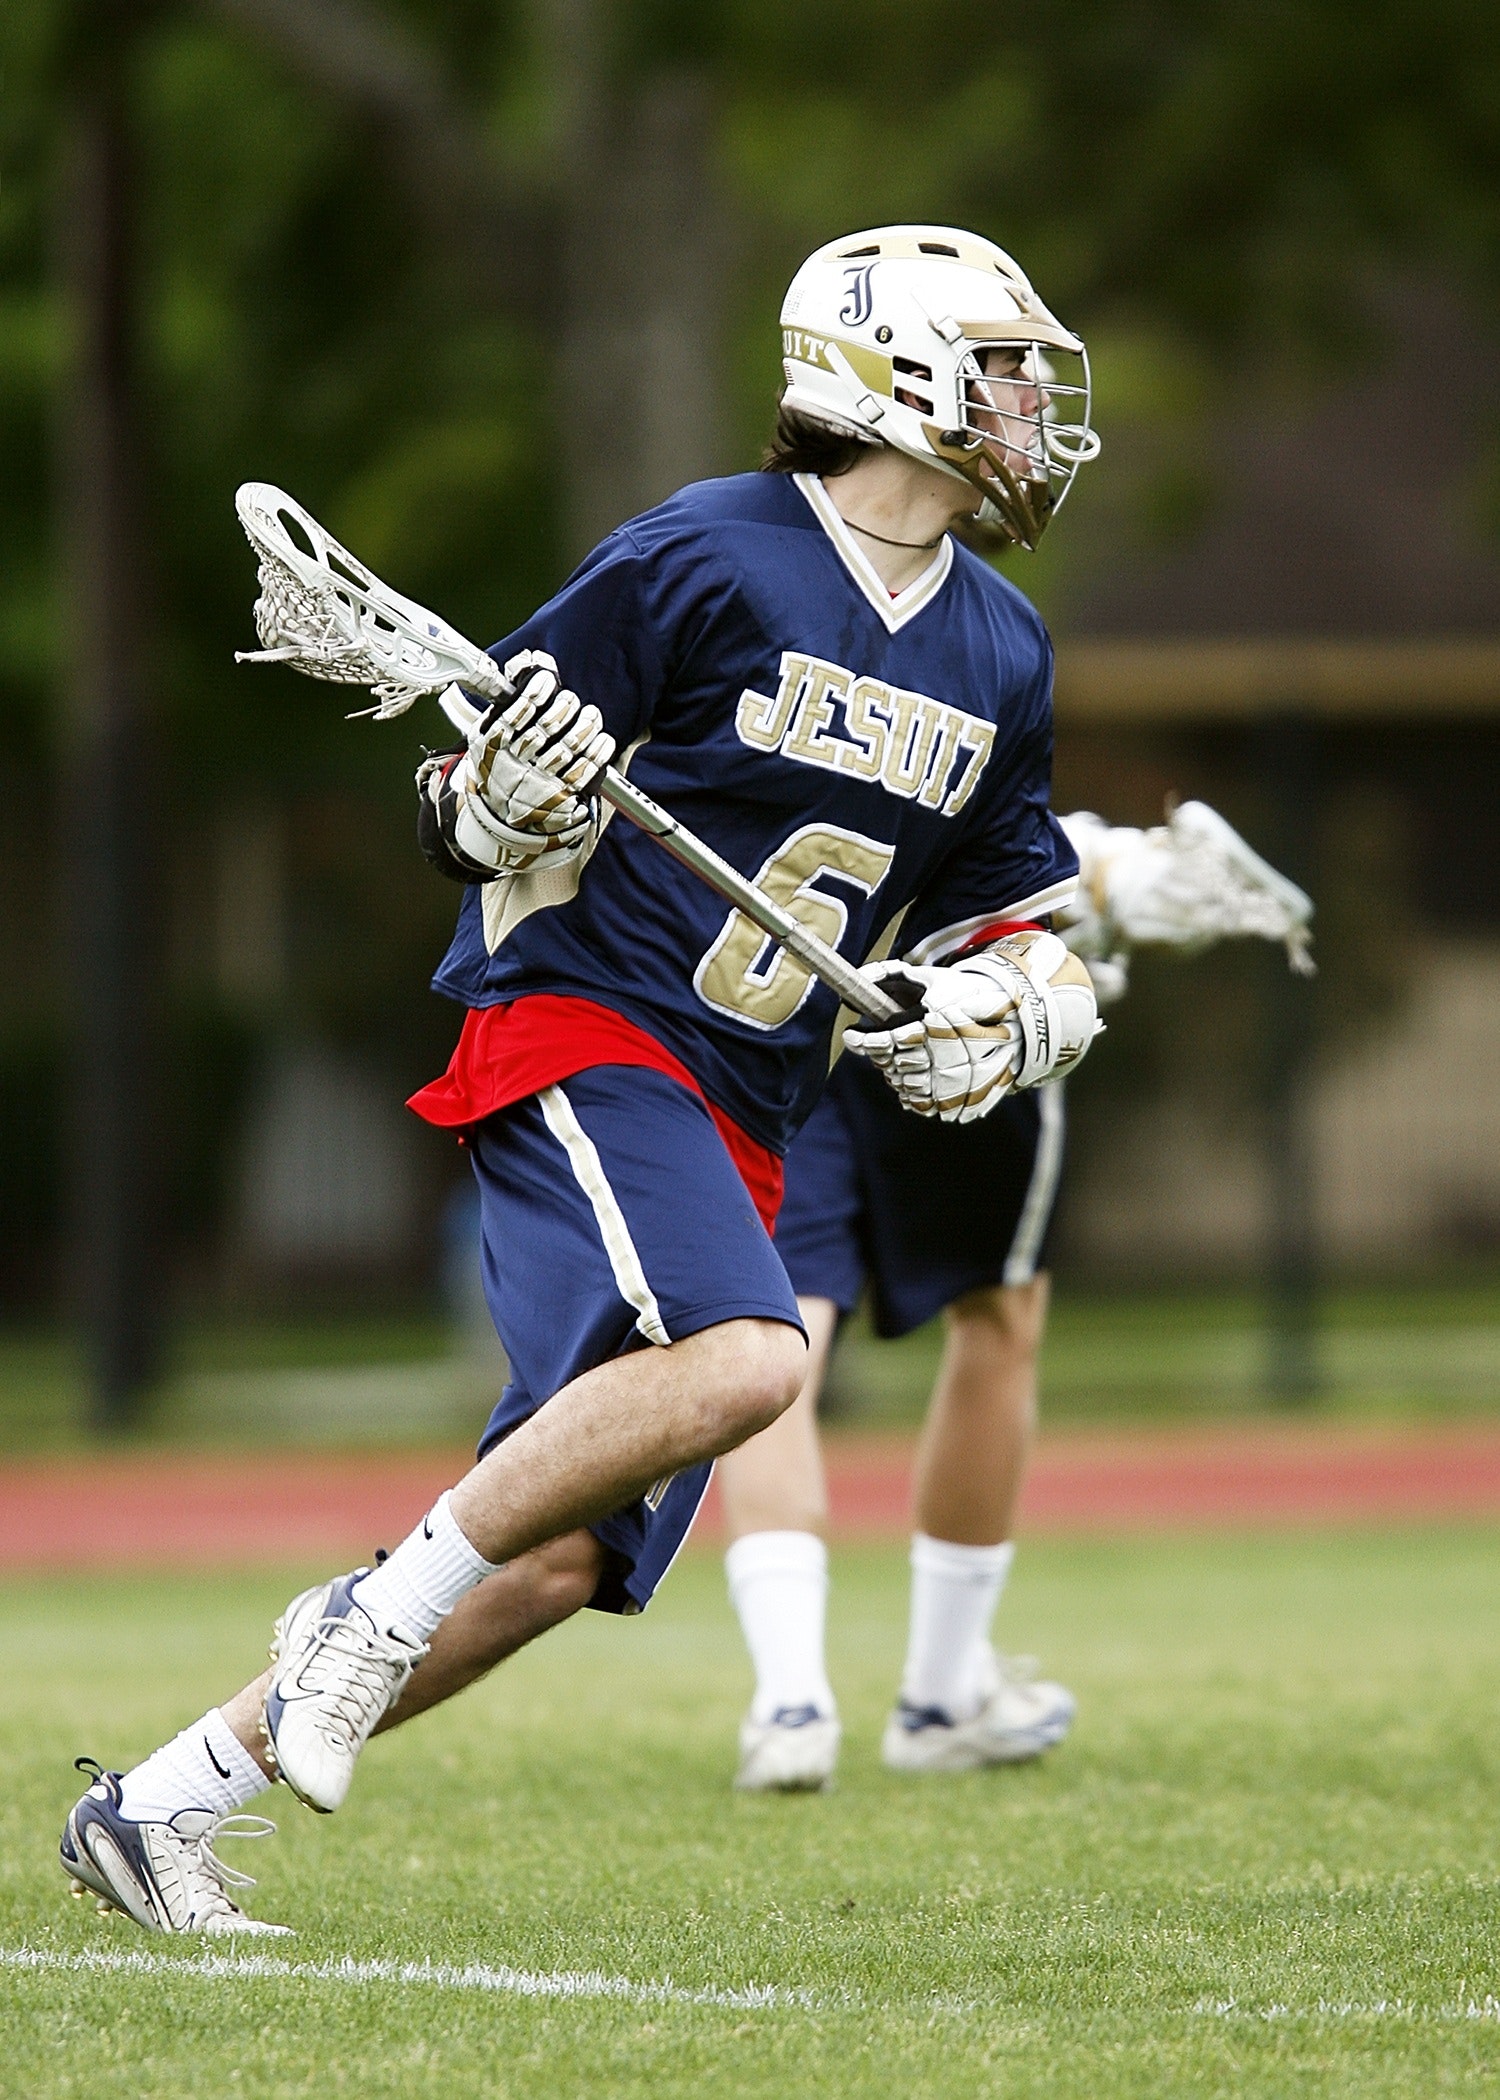 Man in Blue and White Jersey Playing Lacrosse, Action, Outfit, Wear, Uniform, HQ Photo